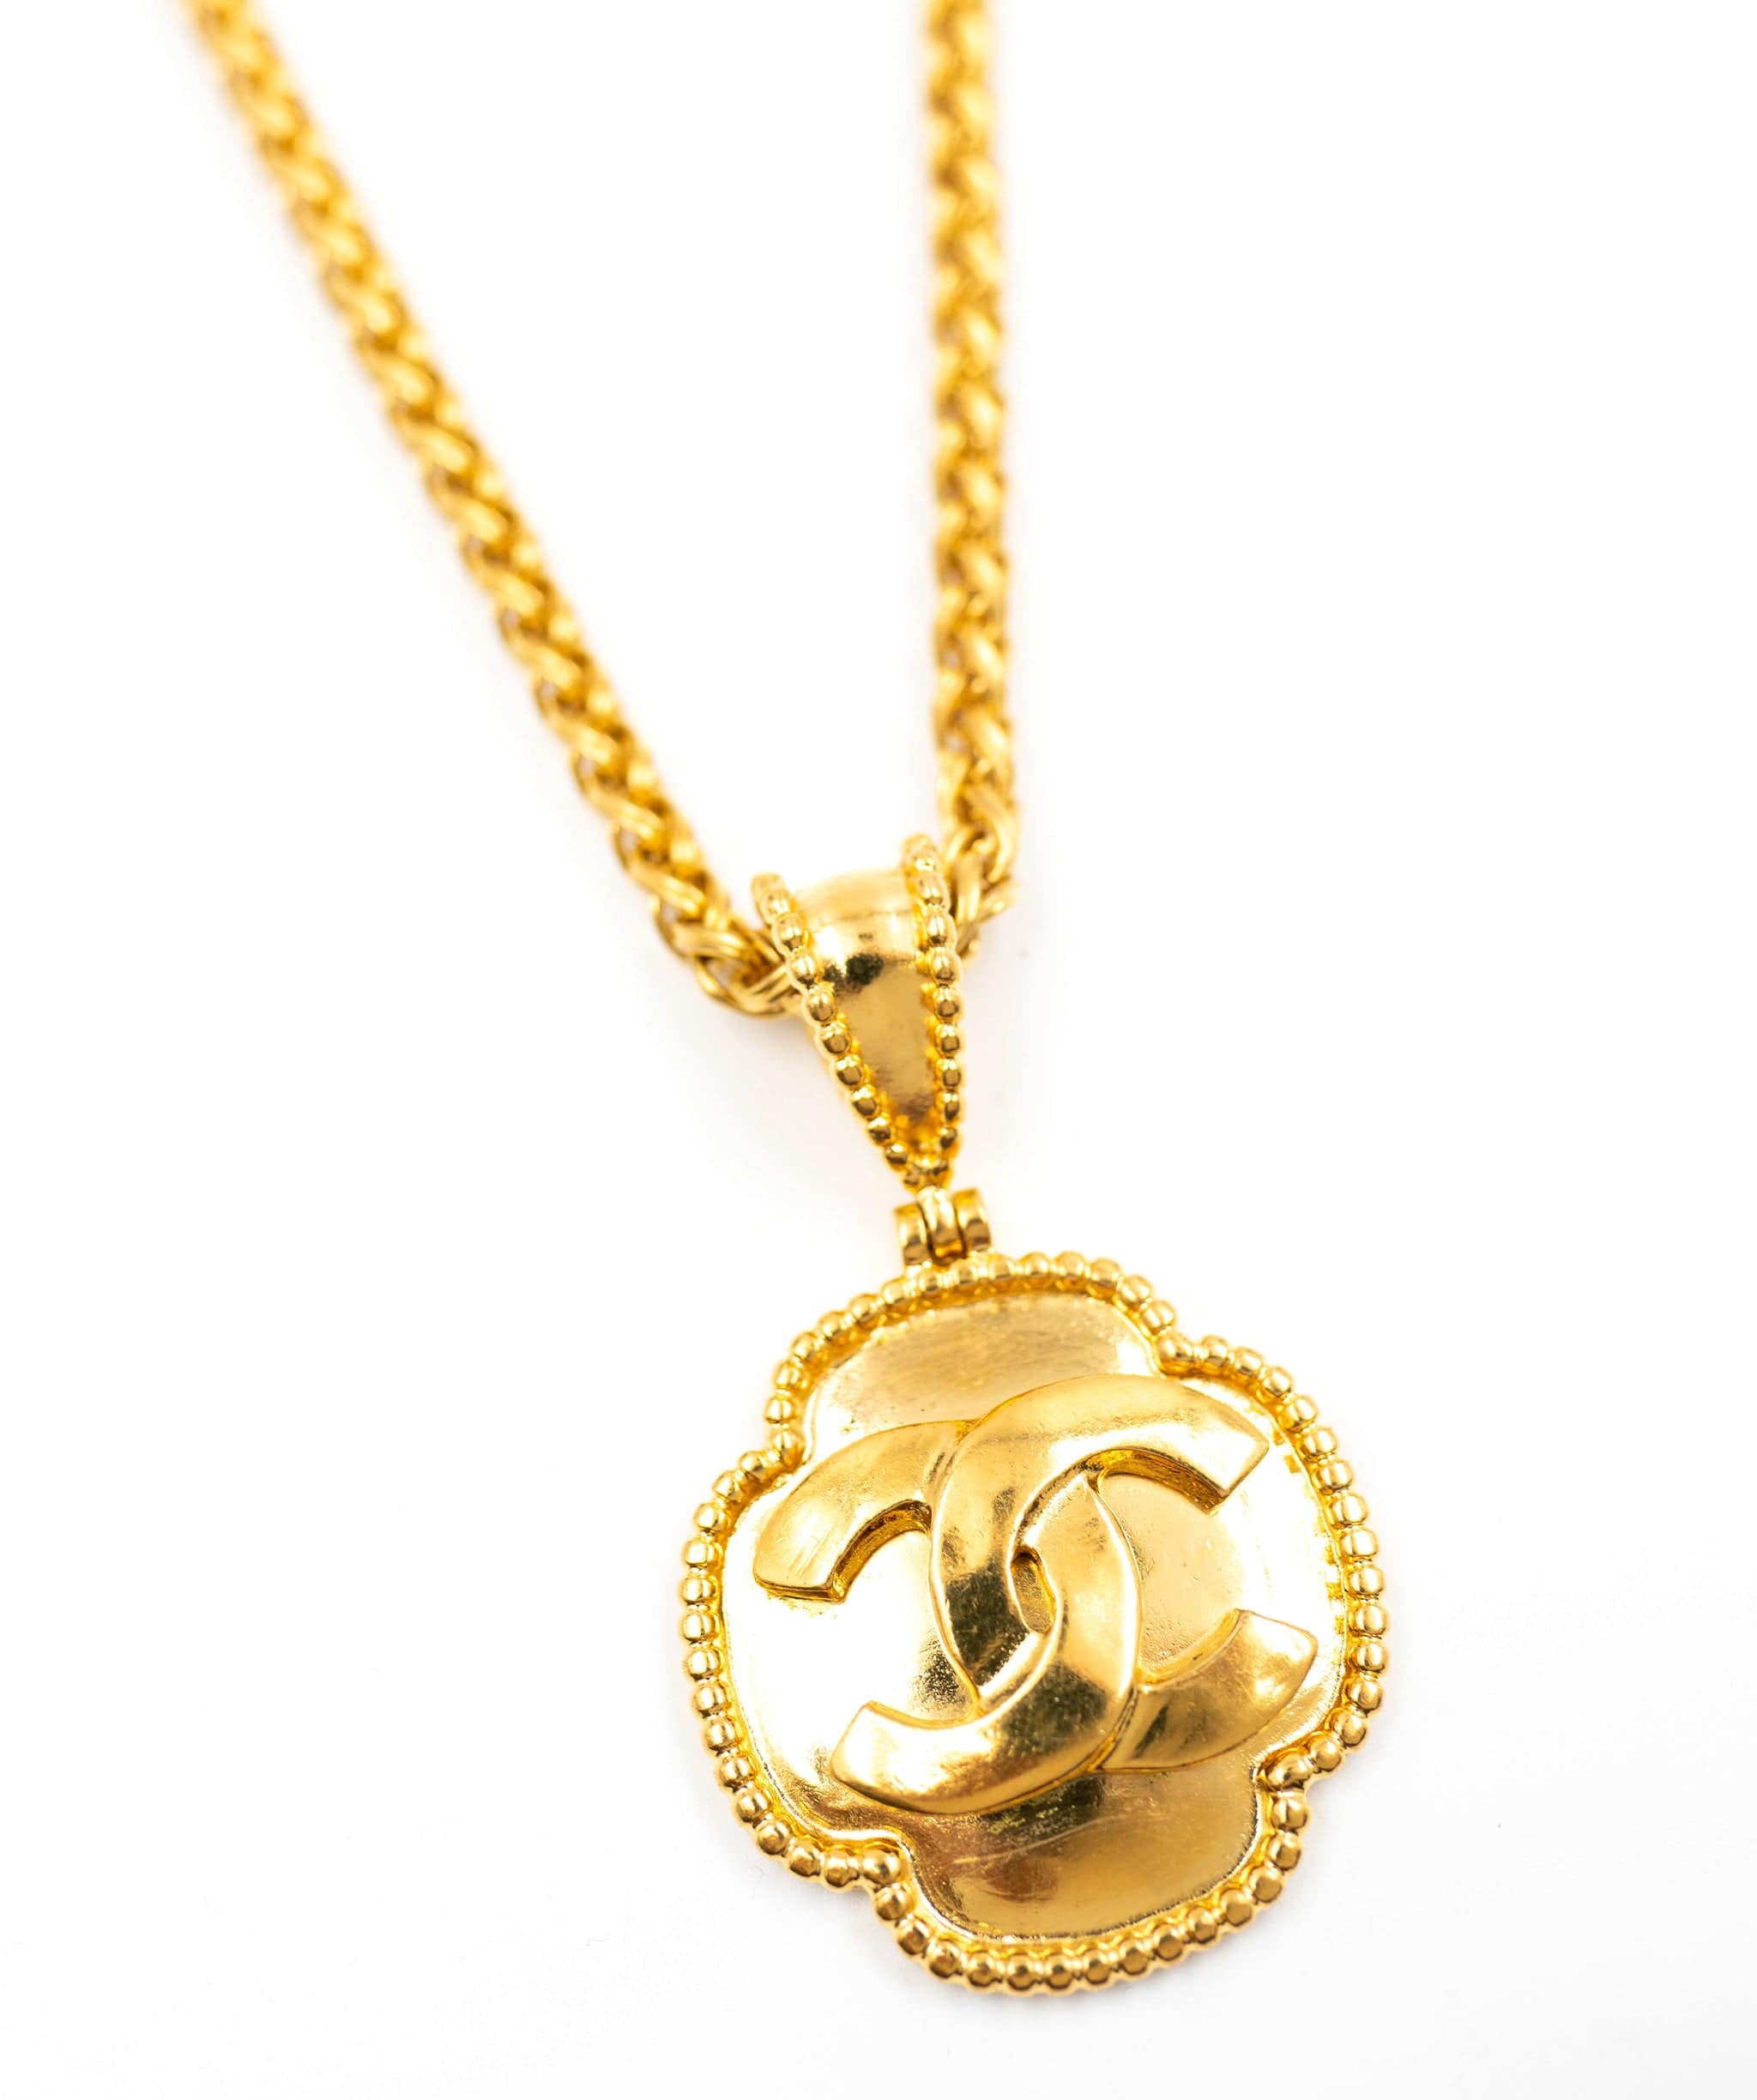 Chanel Chanel Vintage Clover Pendant with CC logo Necklace - AWL3619